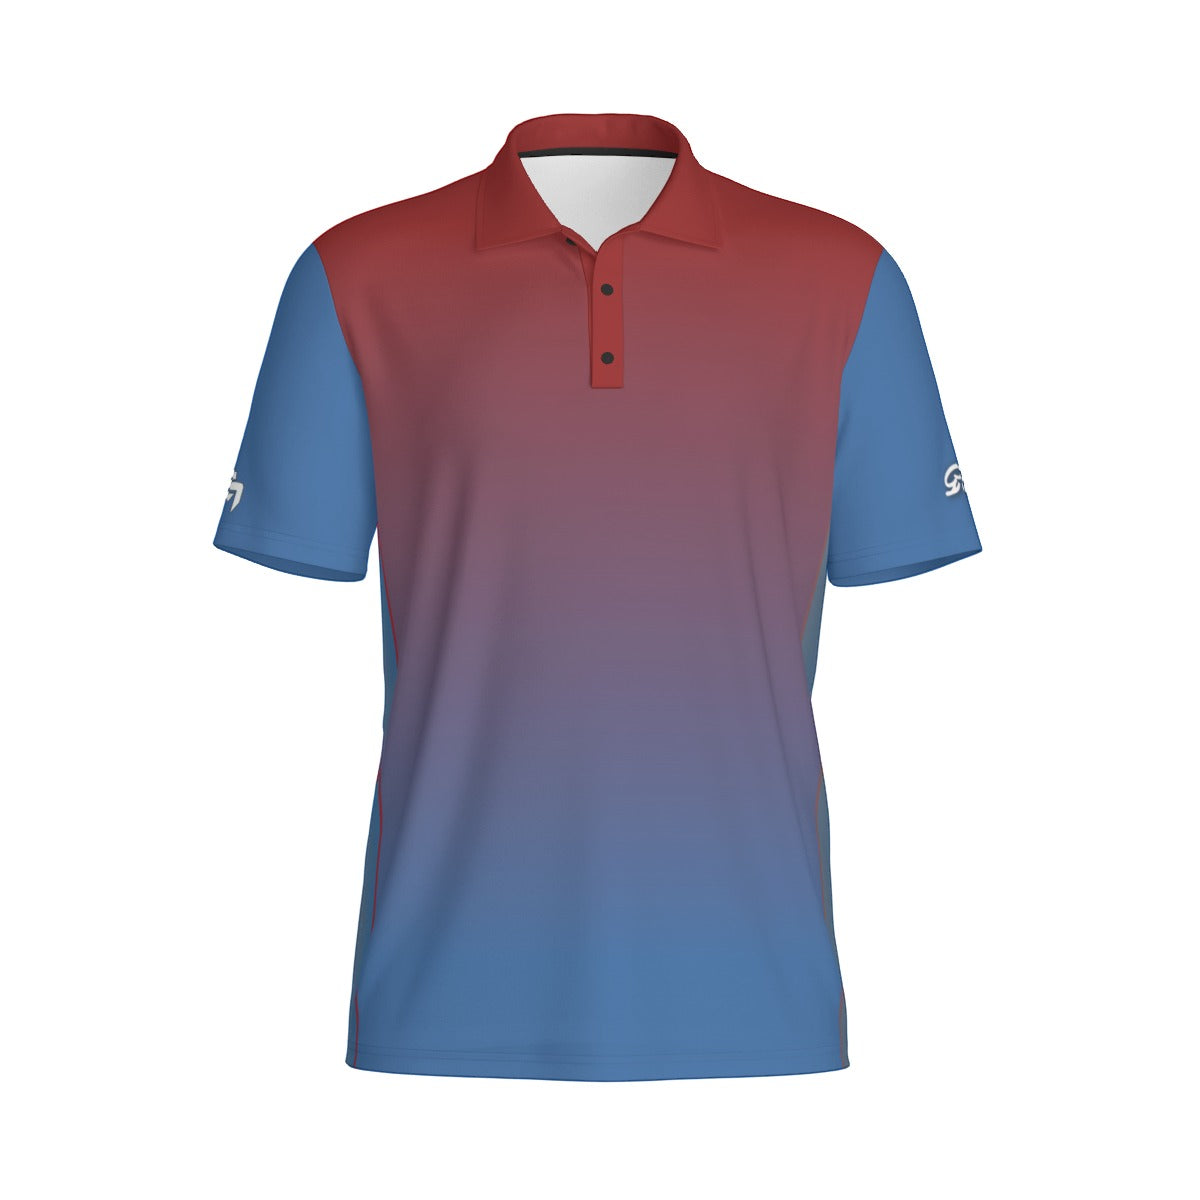 Elevated stretchy spandex polyester wicking polo